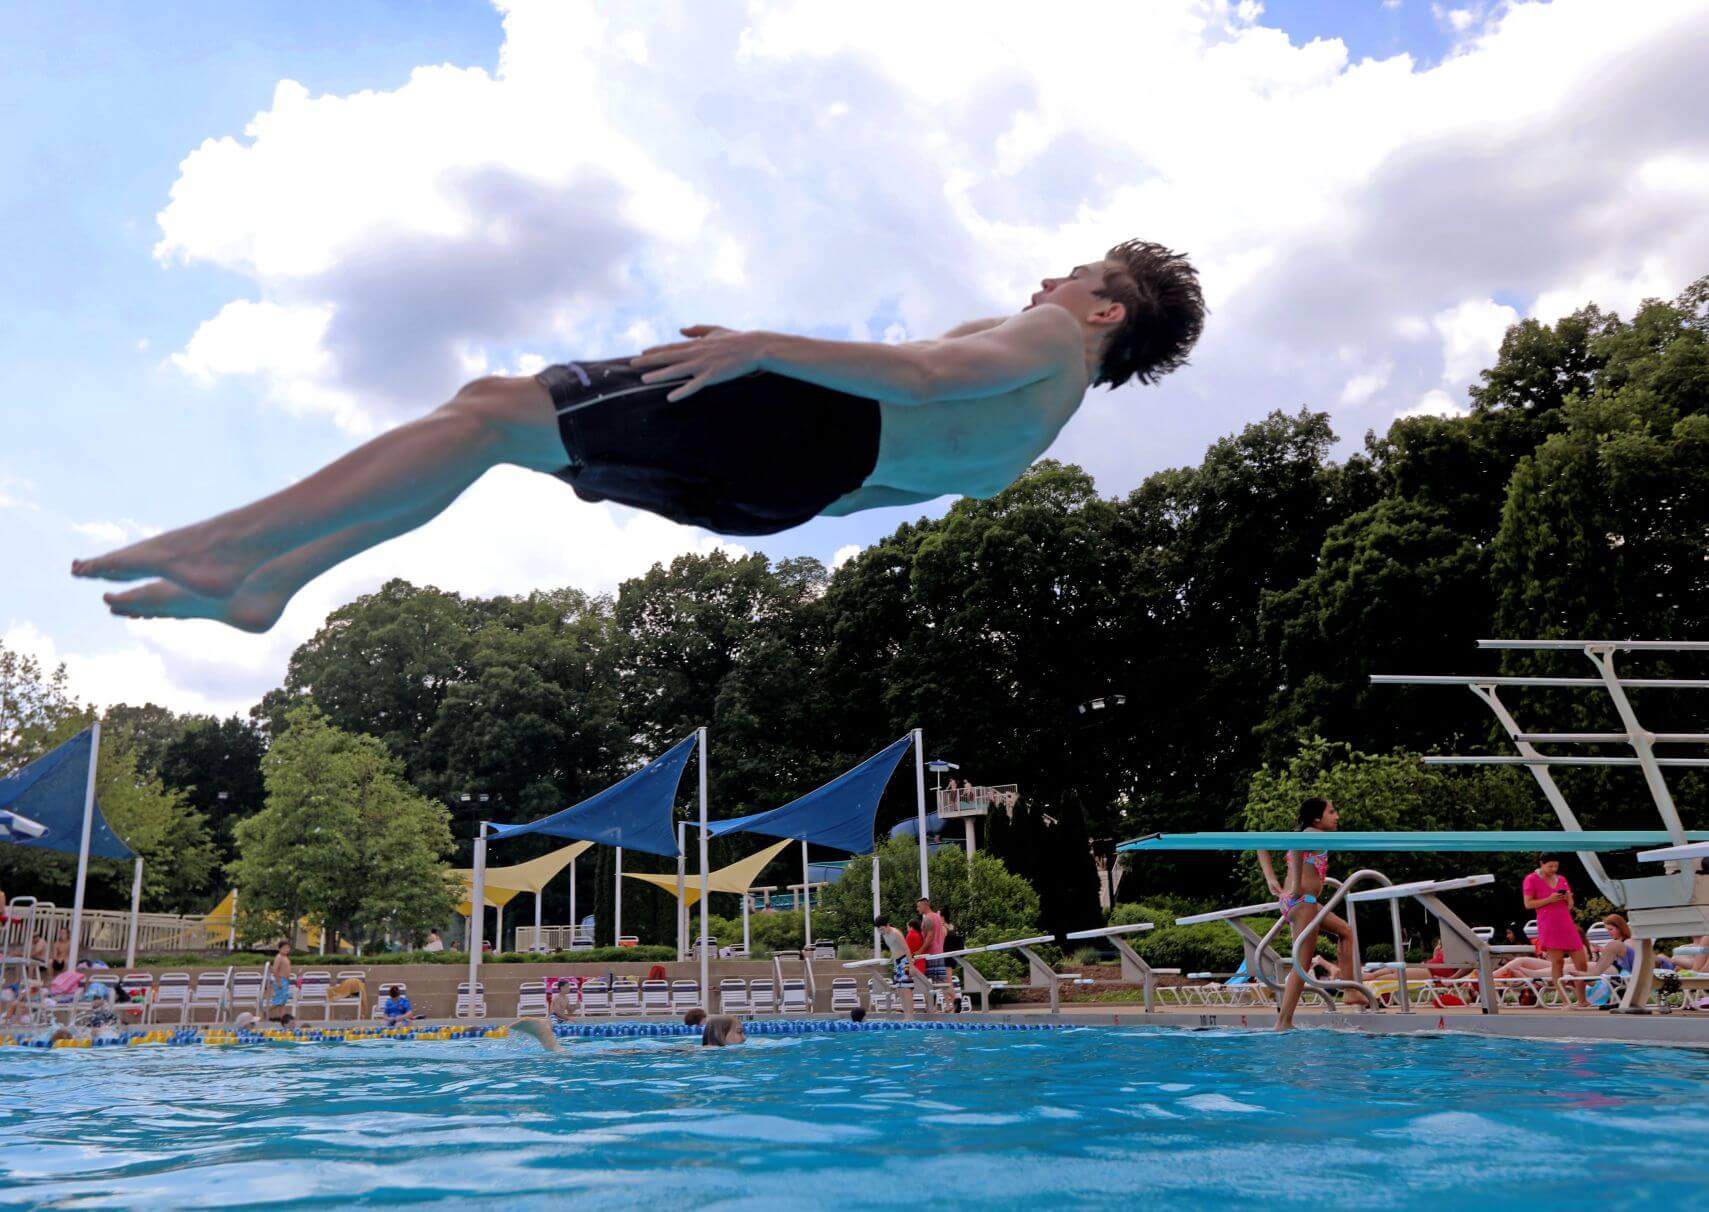 No membership? Not a resident? No problem! Dive into an area pool